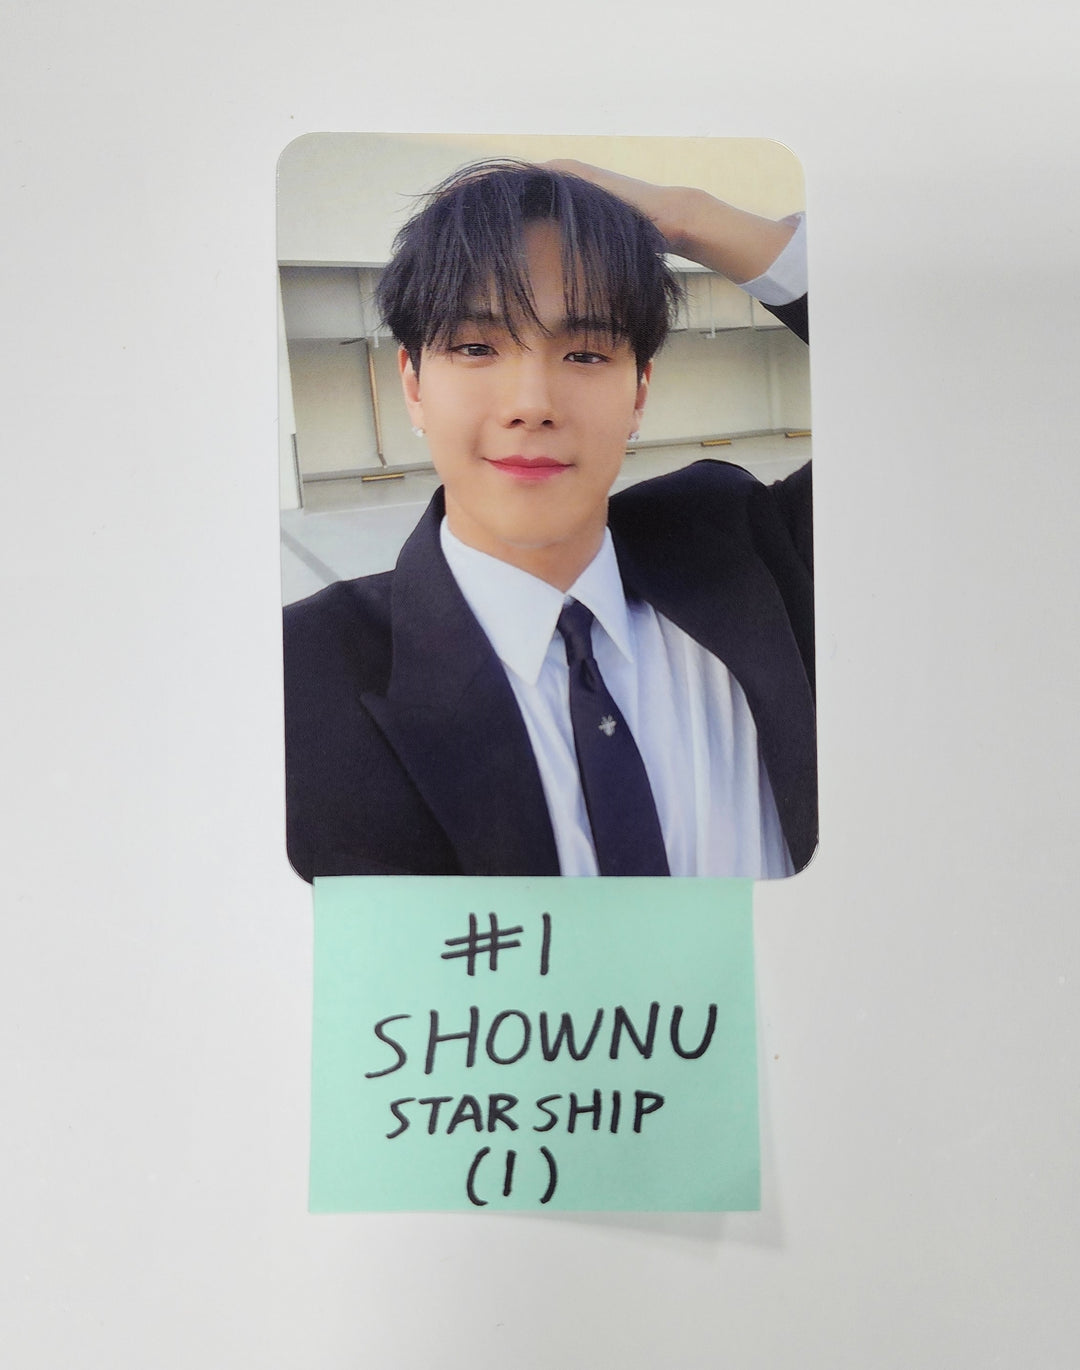 Shownu X Hyungwon "The Unseen" - Starship Pre-Order Benefit Photocard